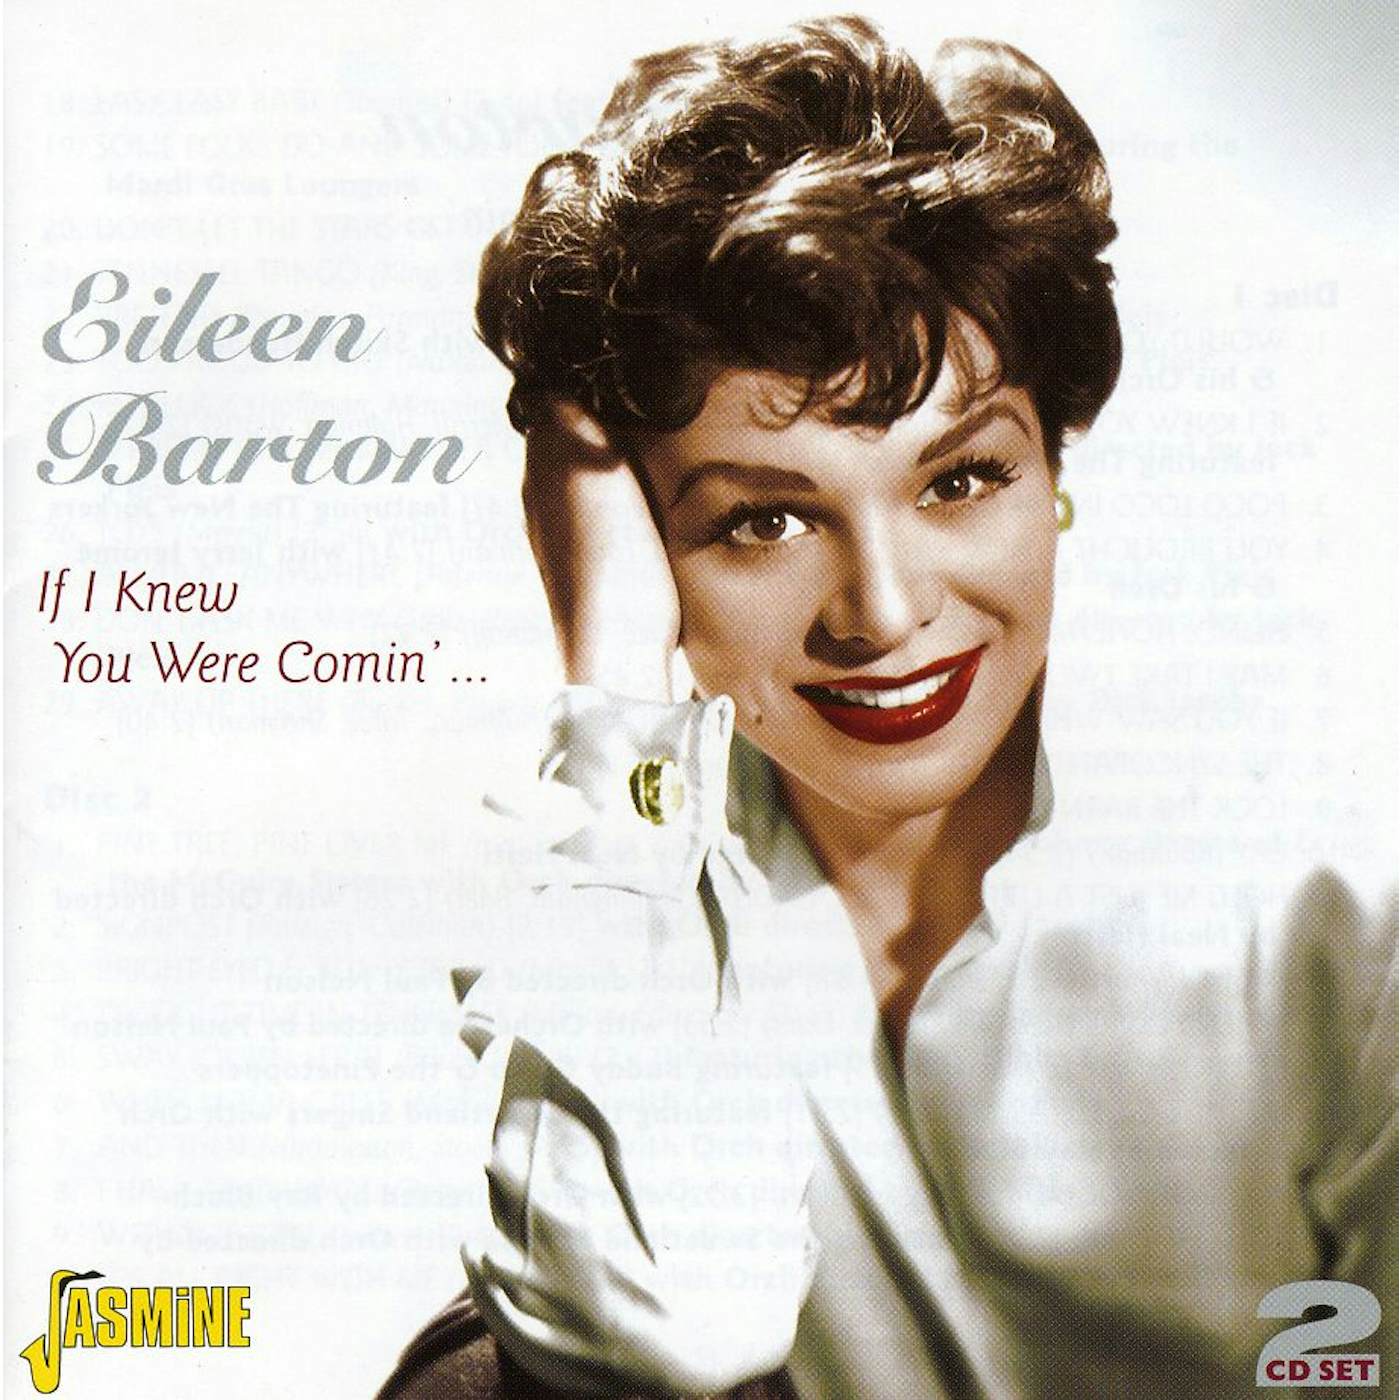 Eileen Barton IF I KNEW YOU WERE COMIN CD